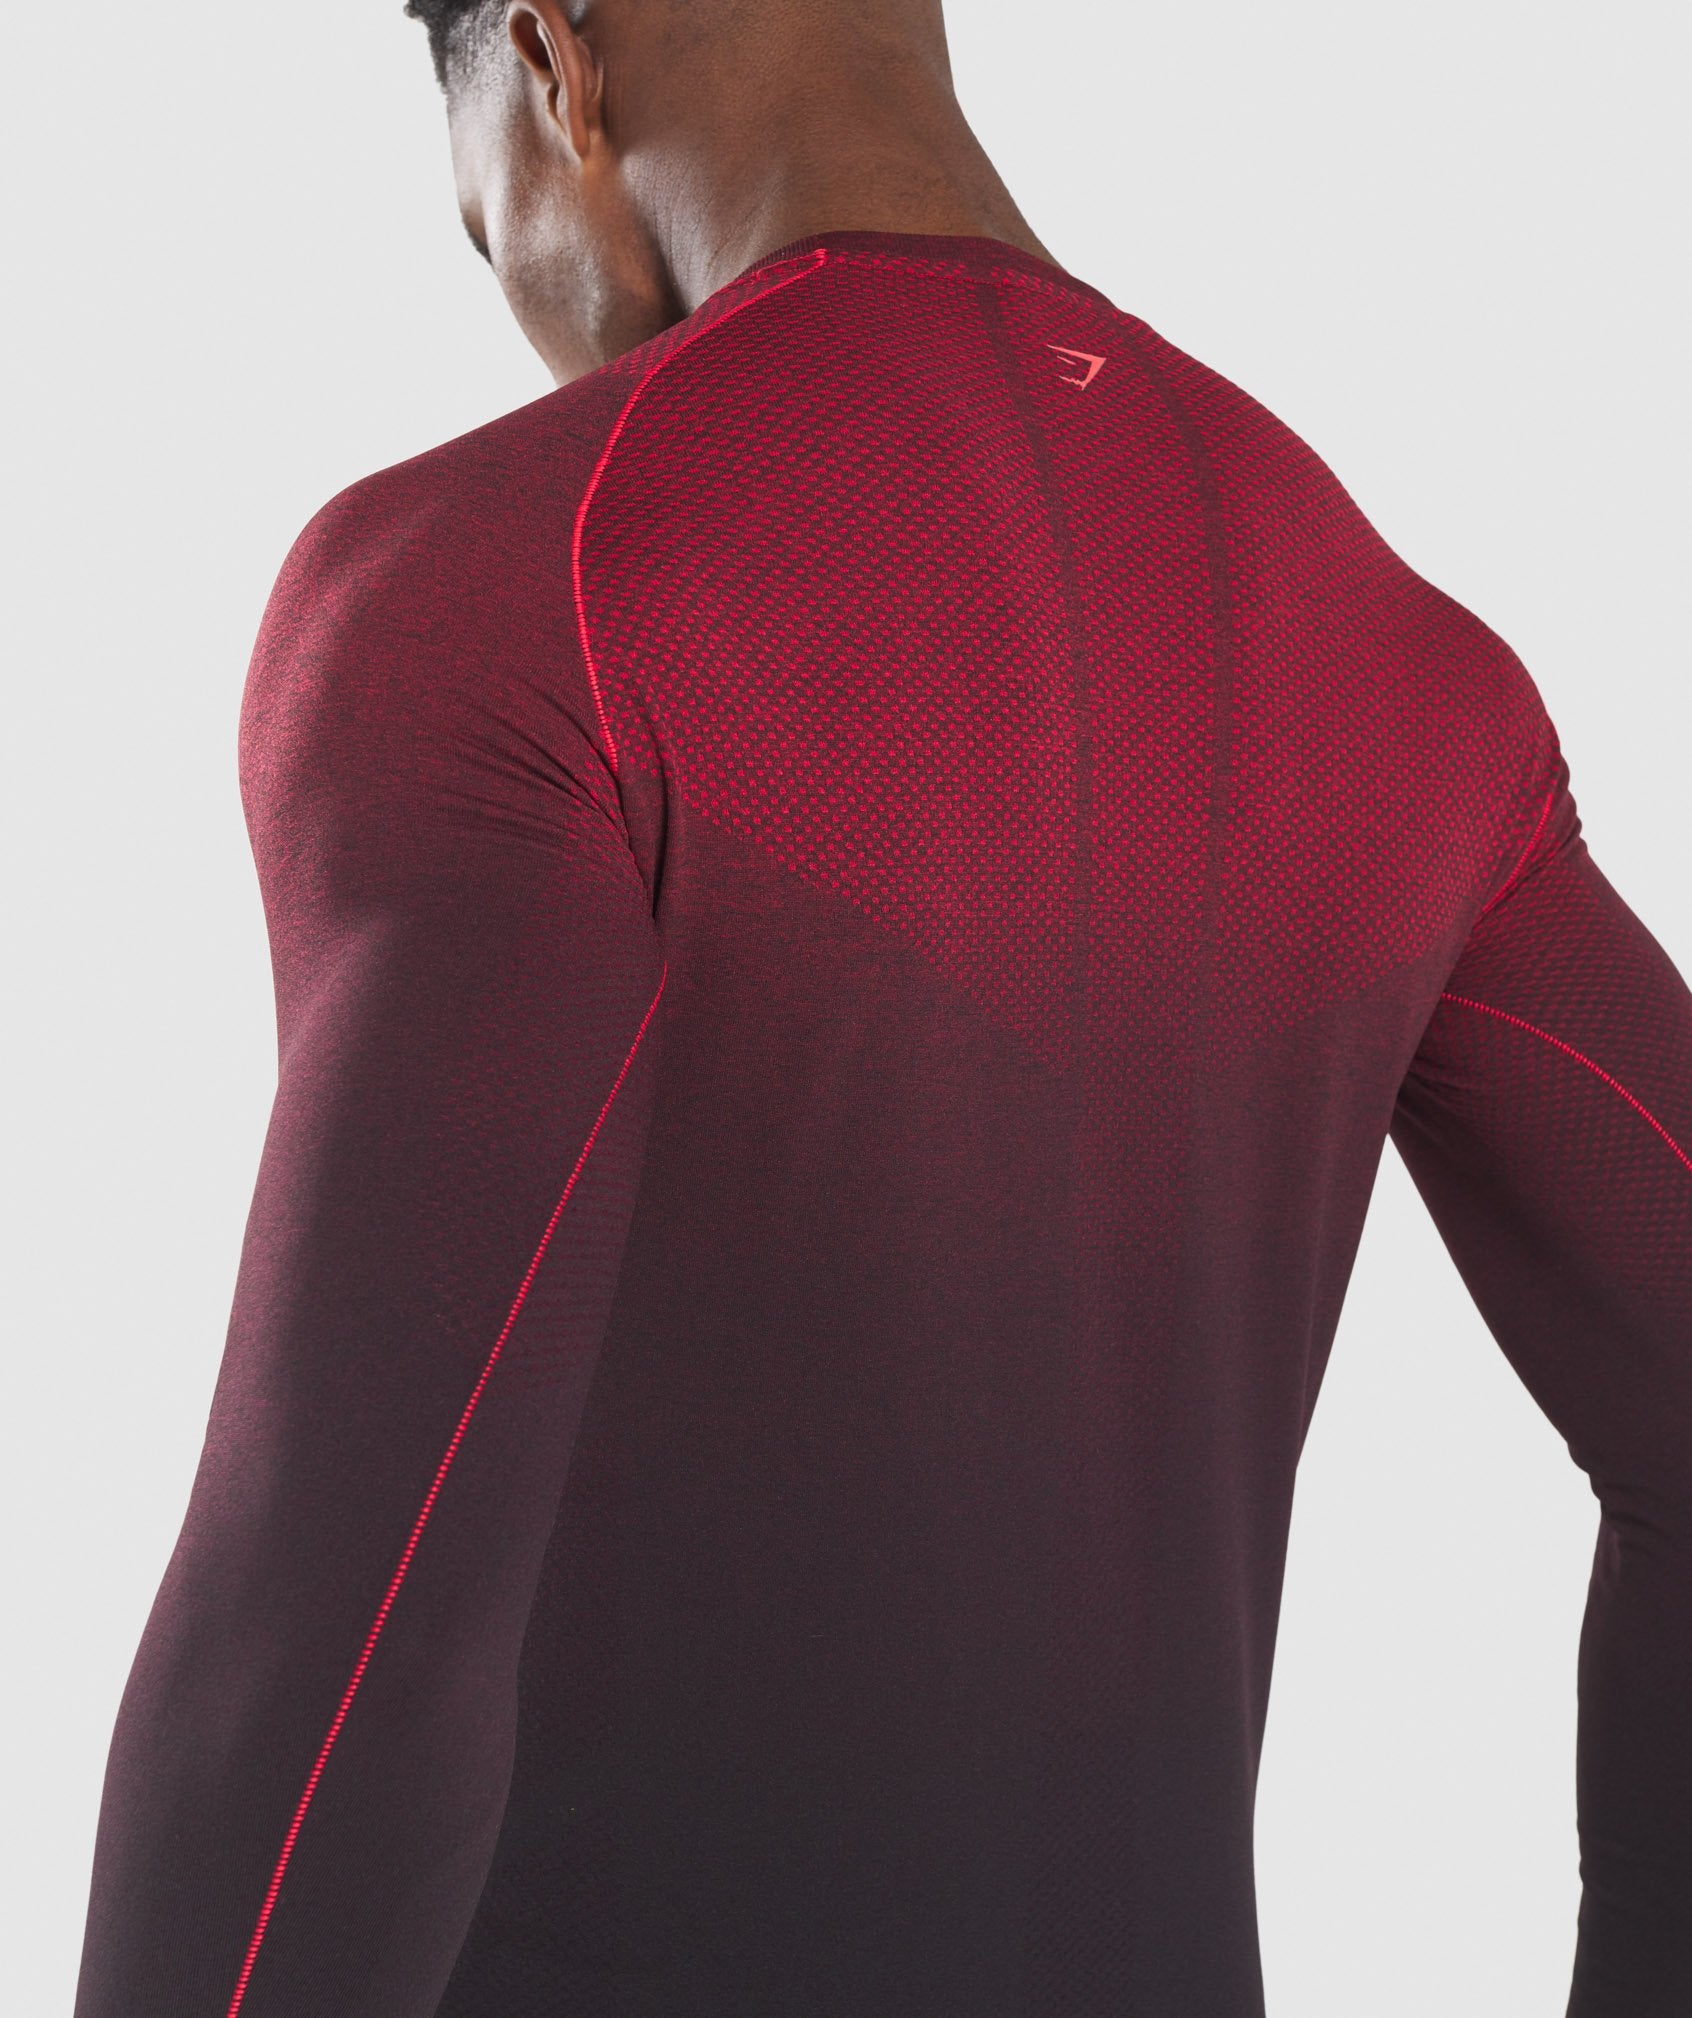 Vital Ombre Seamless Long Sleeve T-Shirt in Black/Red - view 7